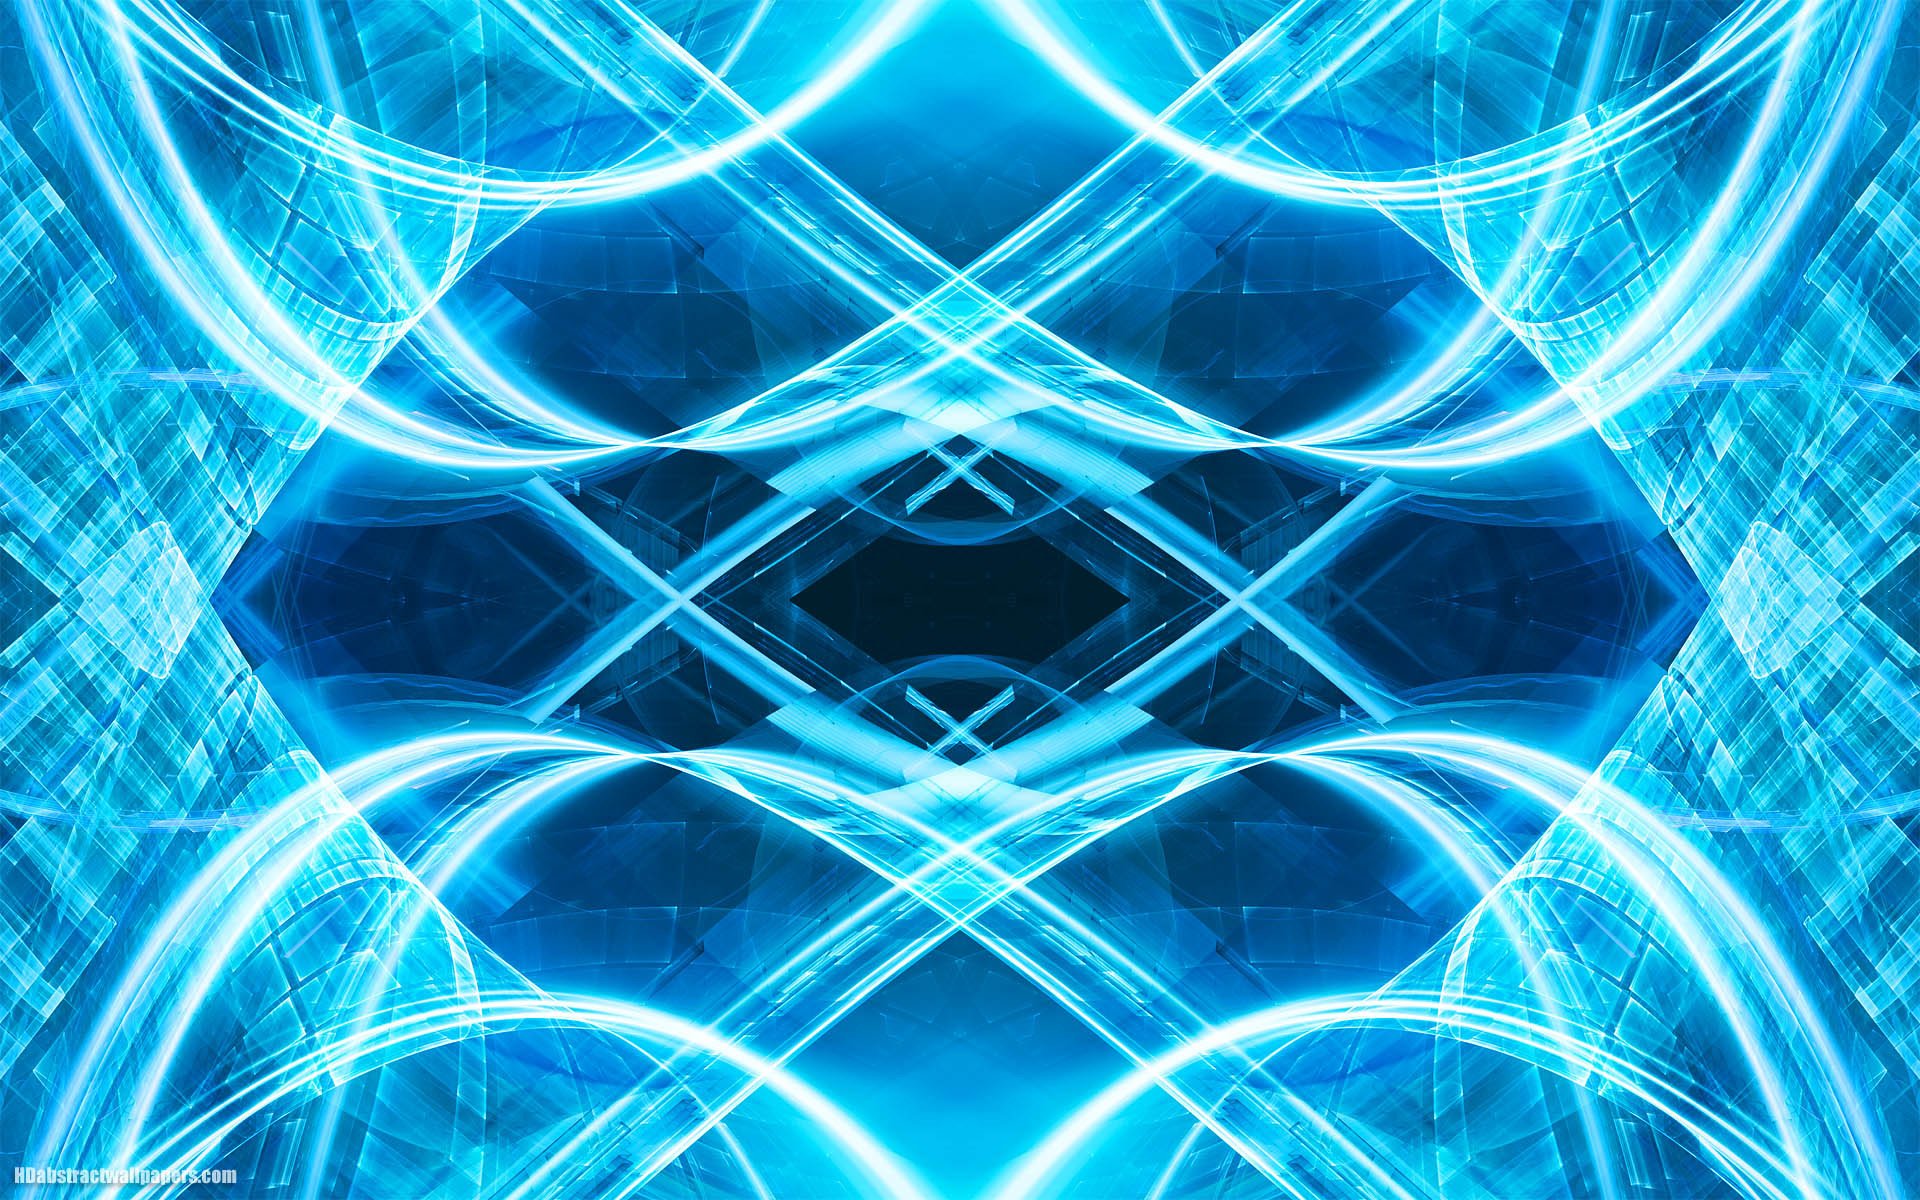 Abstract blue backgrounds with lumi